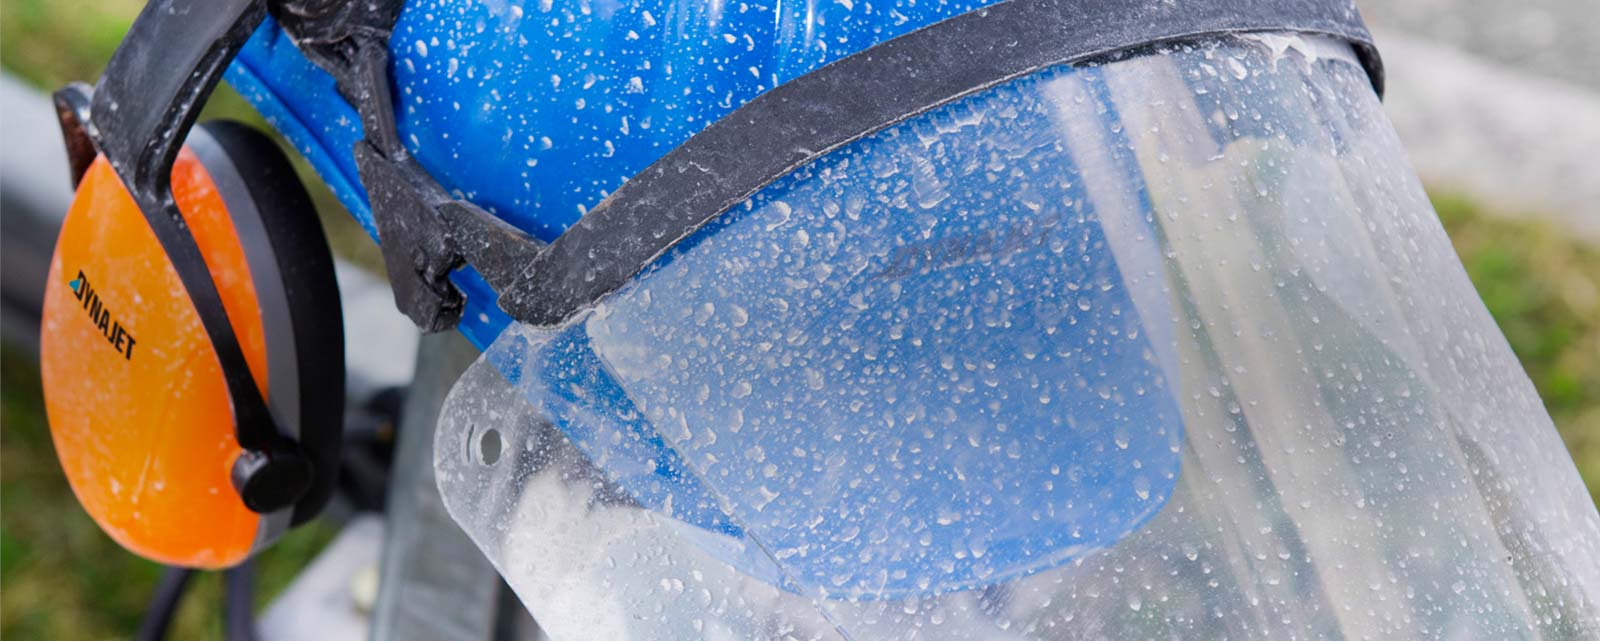 High-pressure water jetting can be dangerous. We recommend that you always wear personal protective equipment (PPE) when working to minimise the risk of injury.